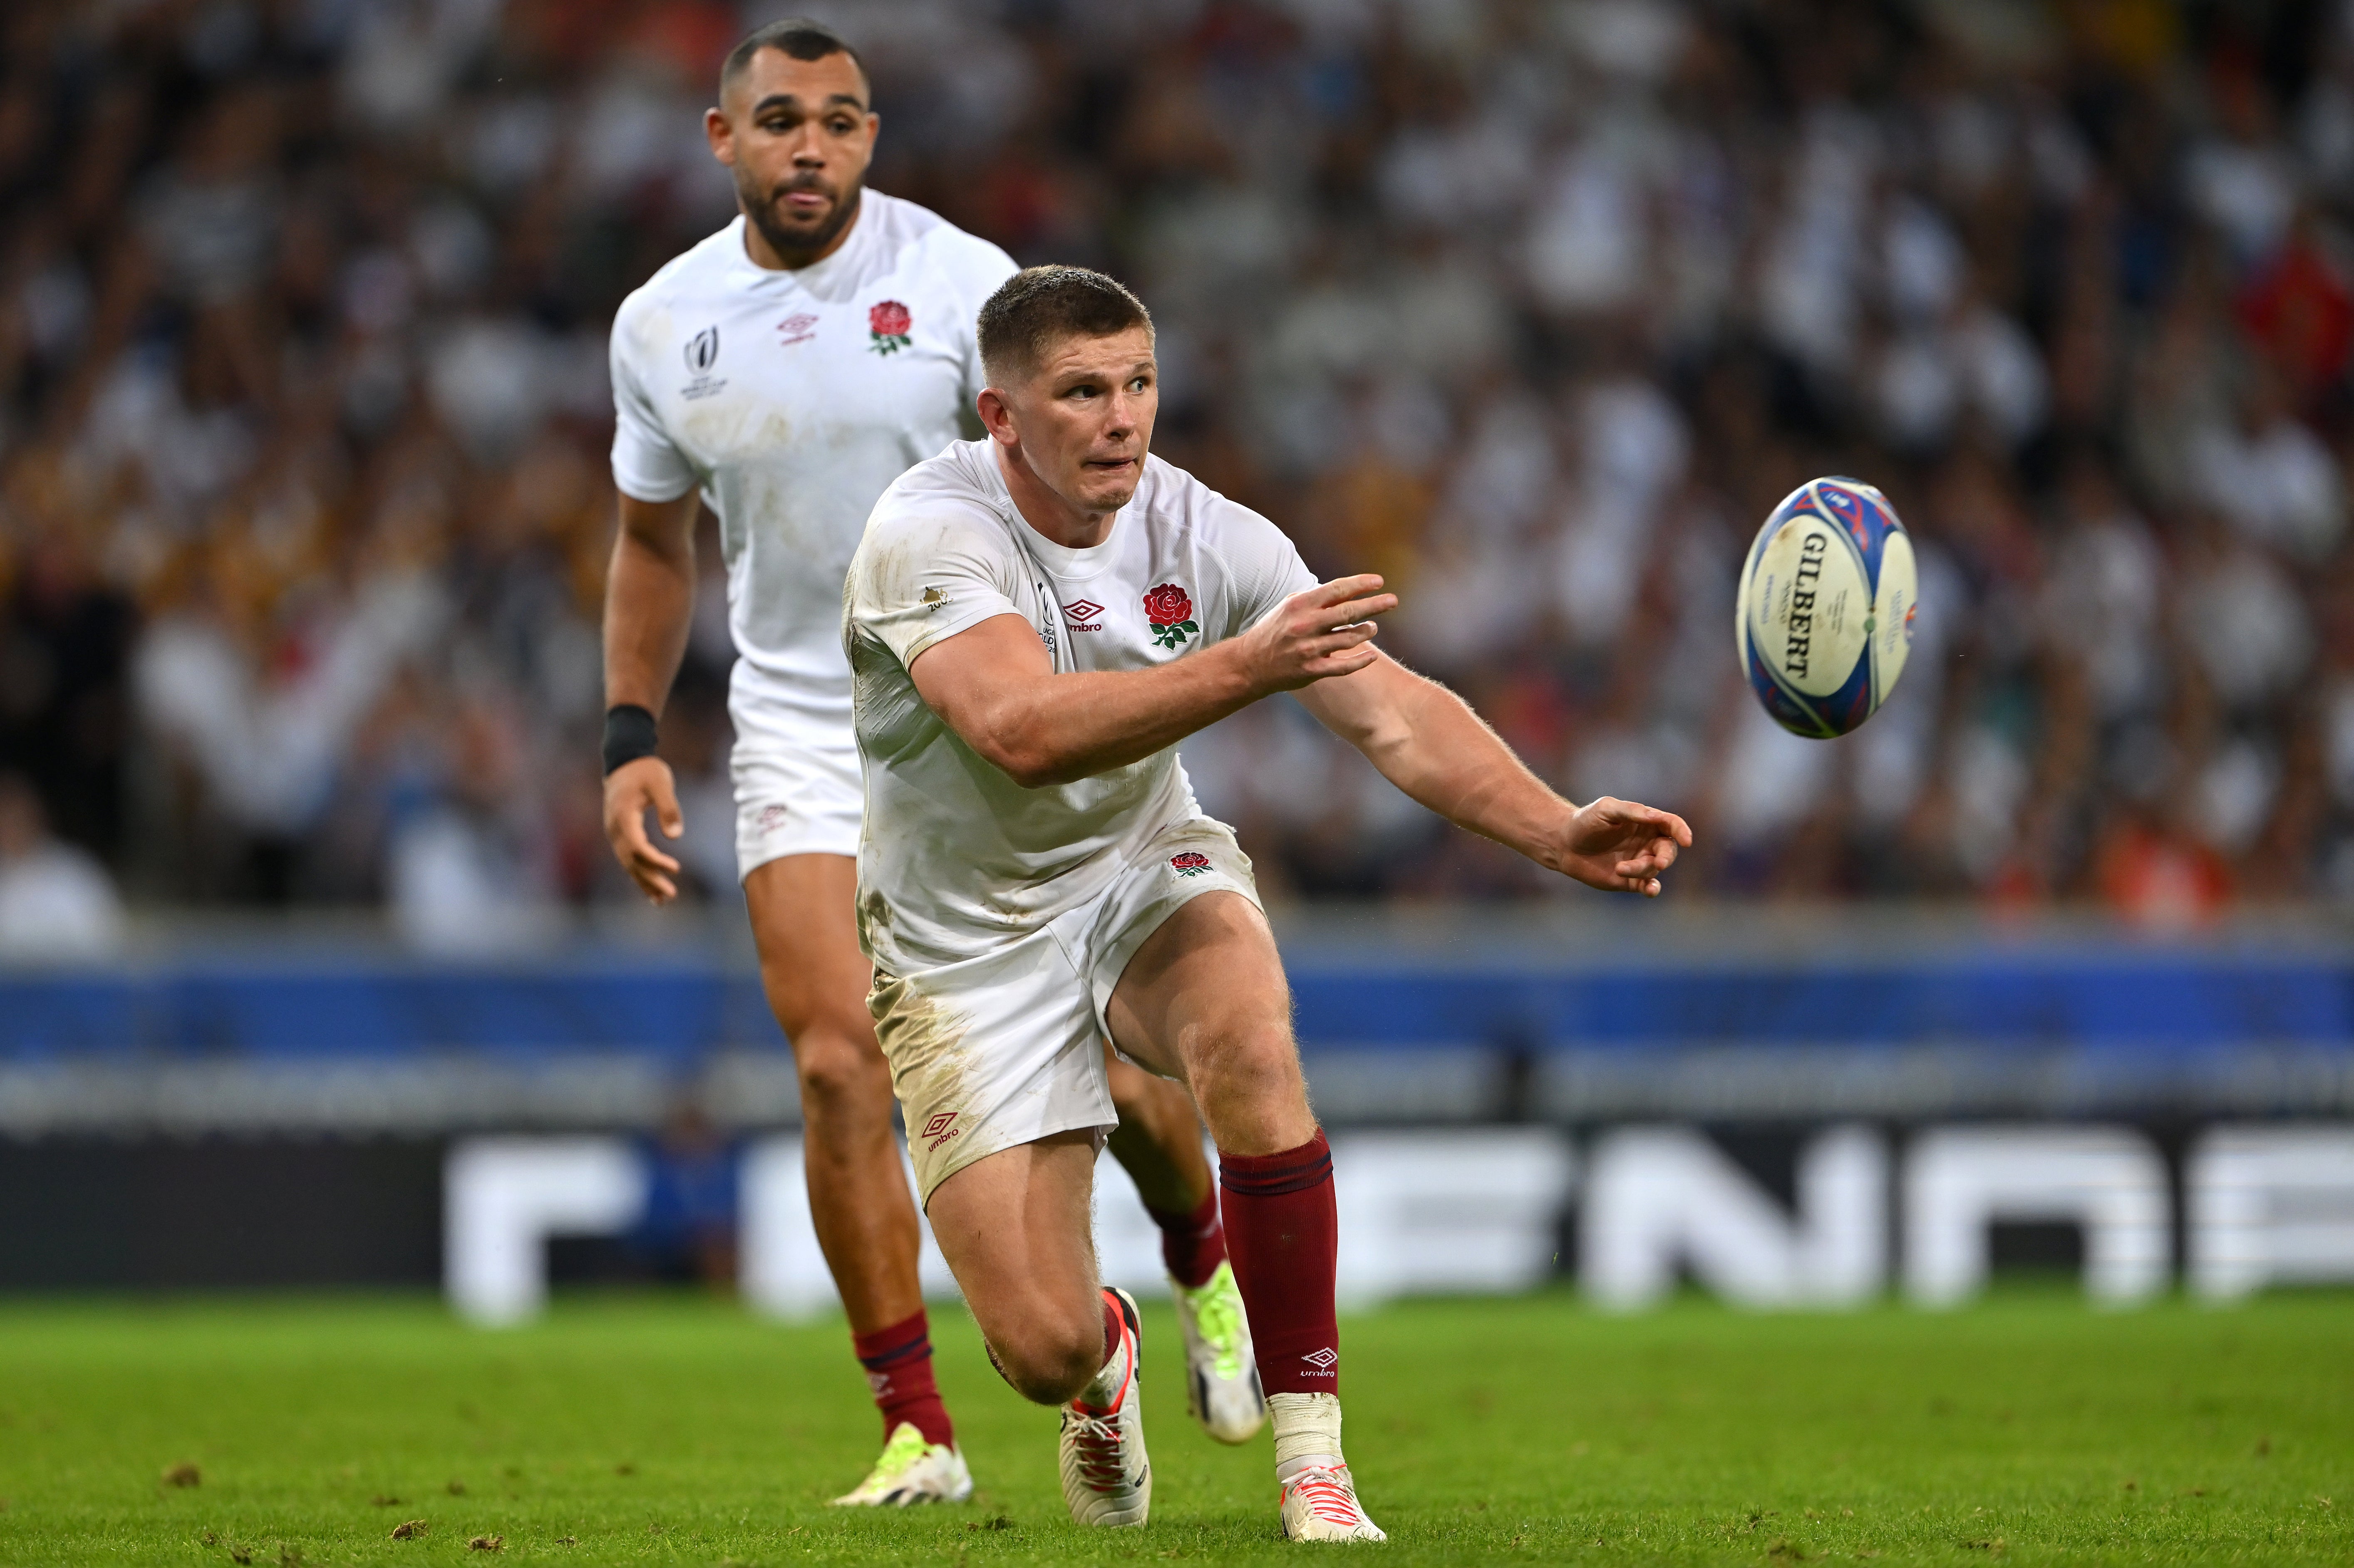 England captain Owen Farrell was short of his best in the scratchy win over Samoa